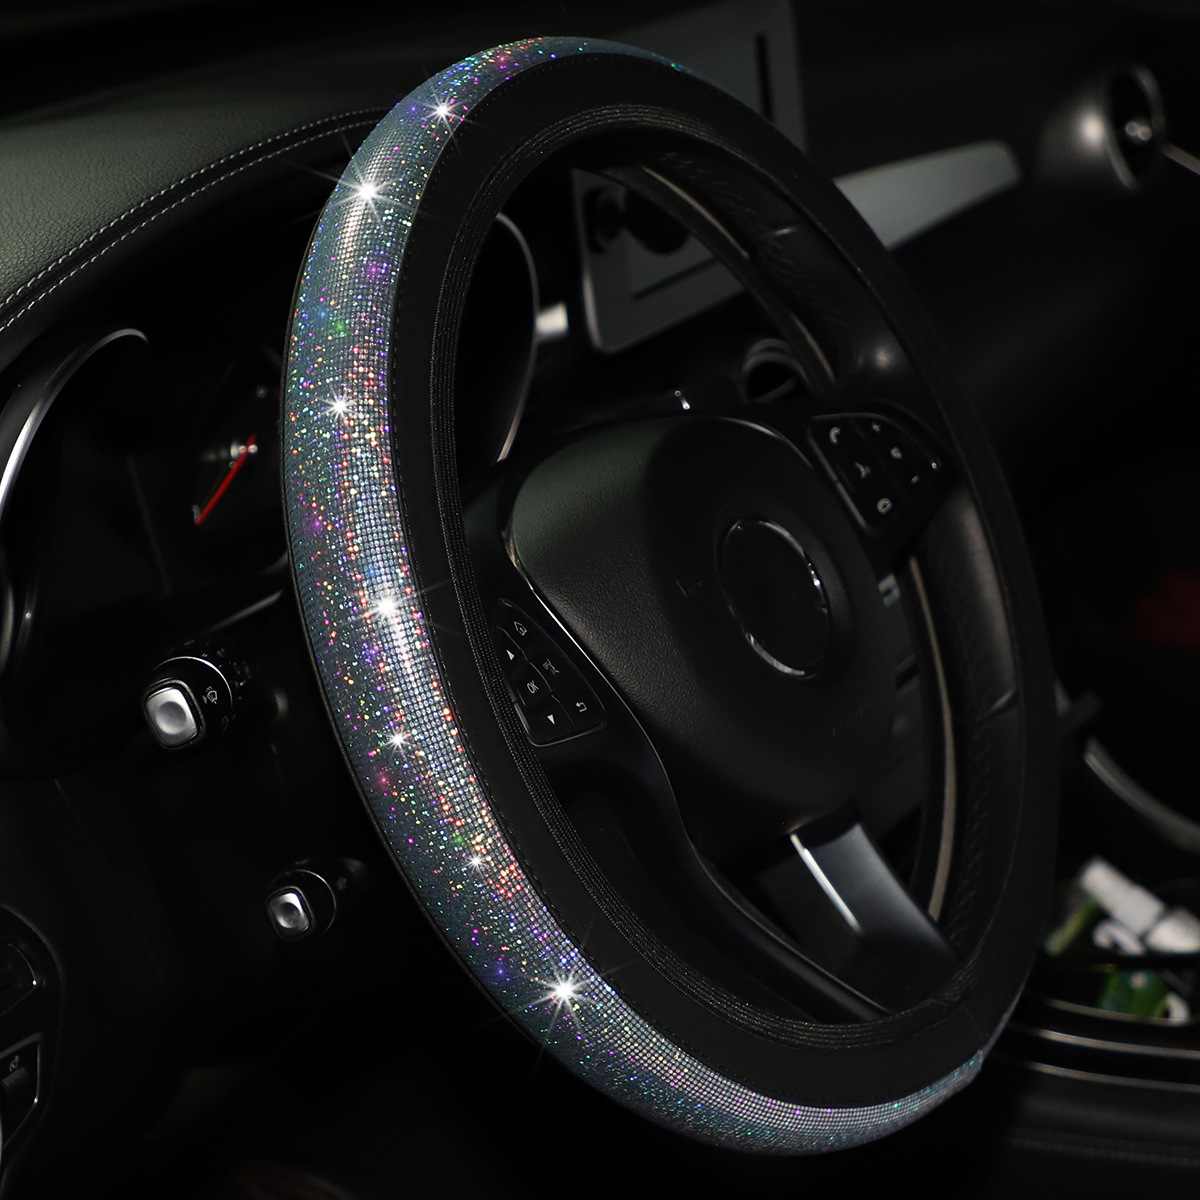 Car Steering Wheel Cover Colorful Color Matching Imitation Diamond without Inner Ring Elastic Band Elastic Handle Cover AliExpress Amazon Women